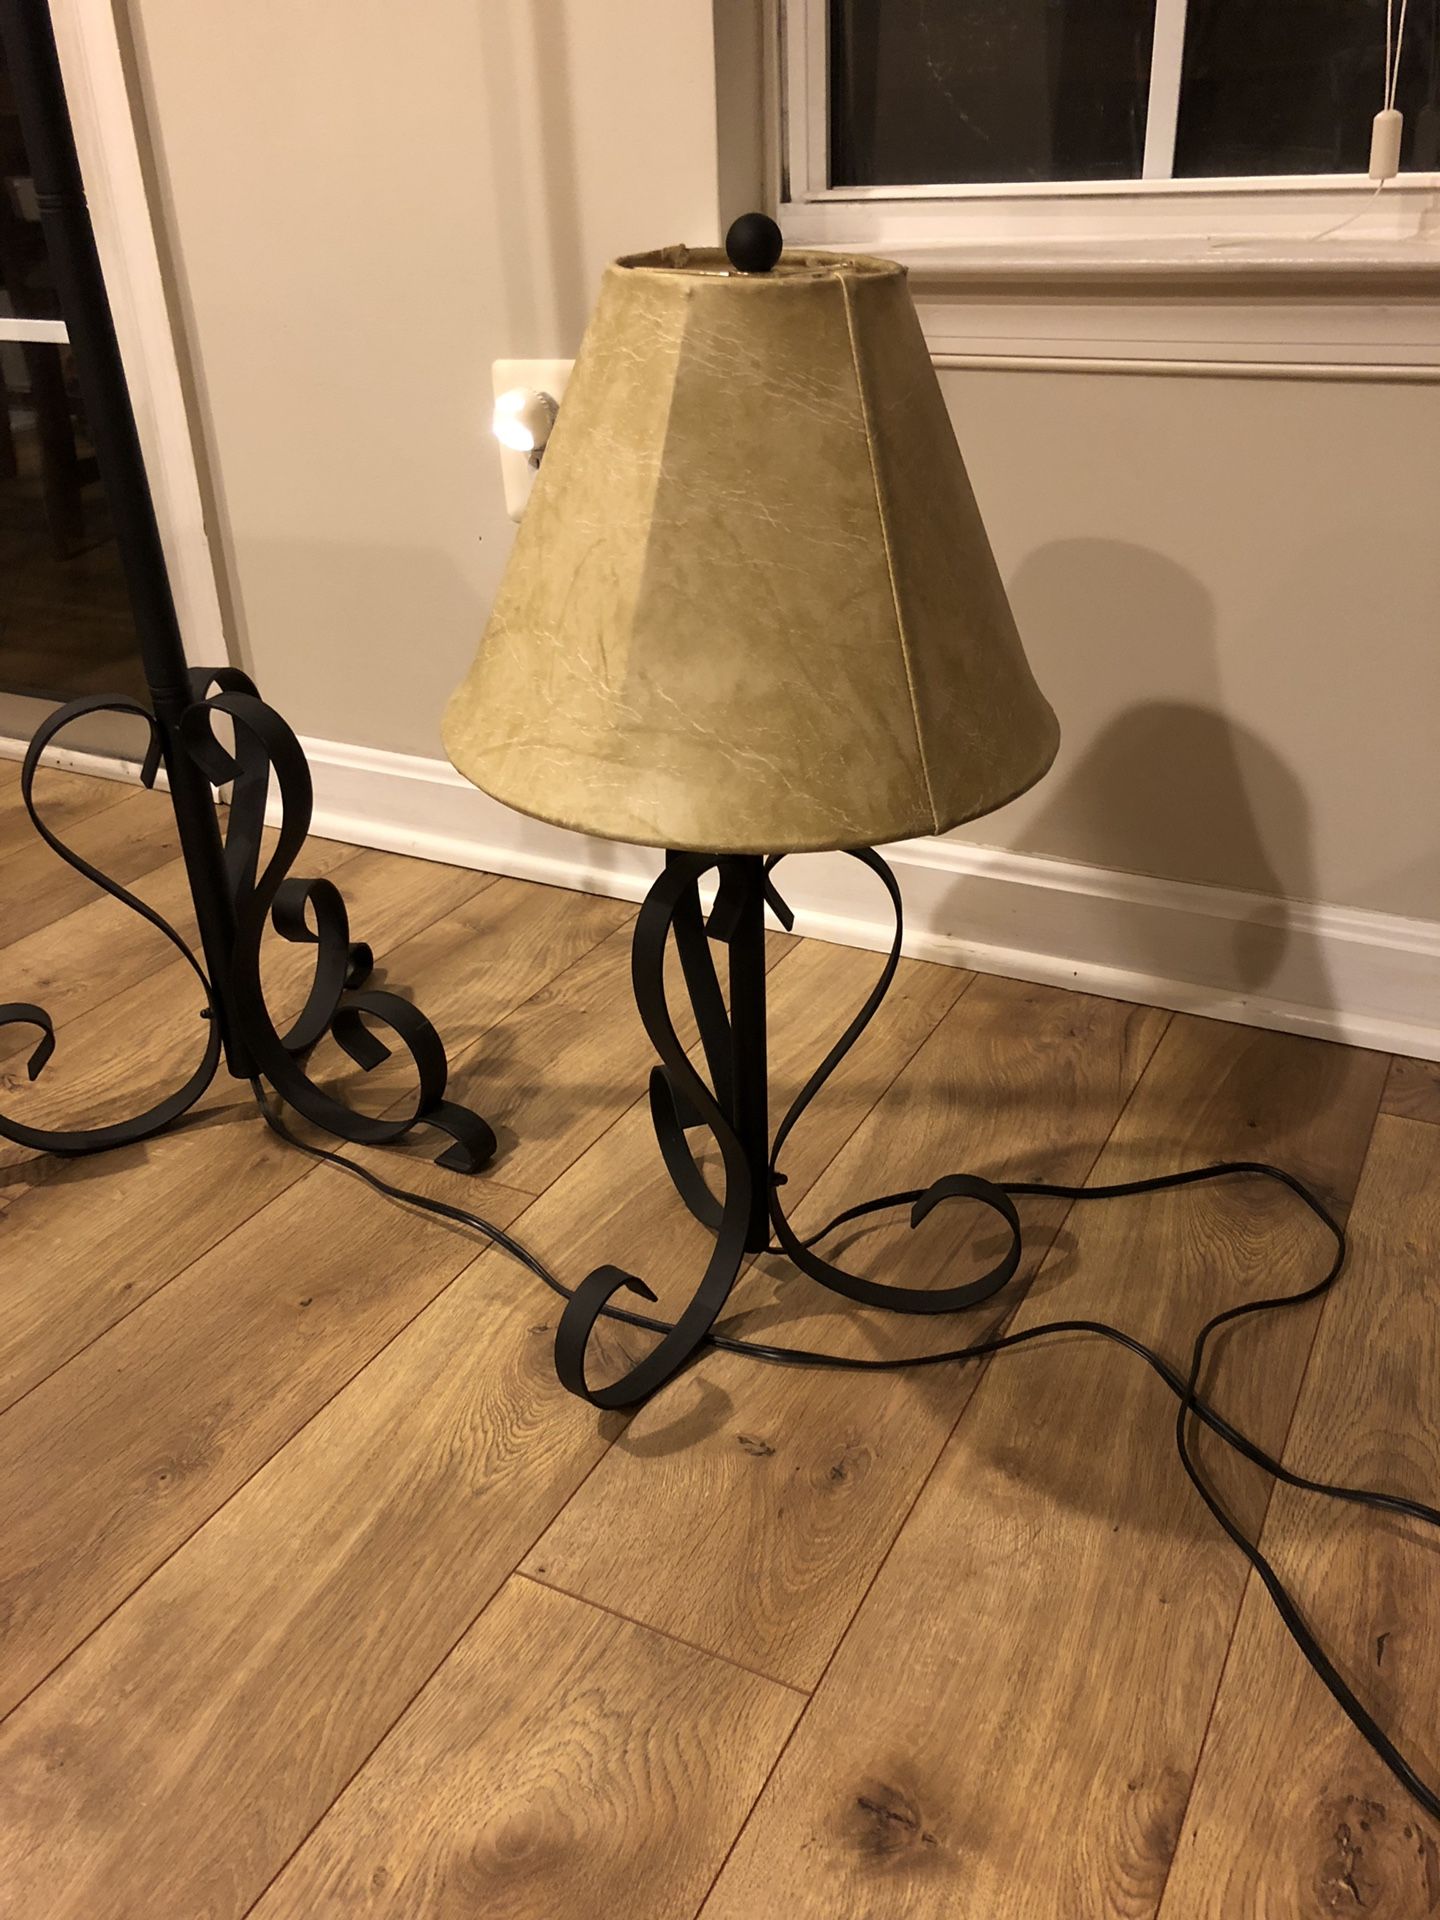 Lamps set of 2